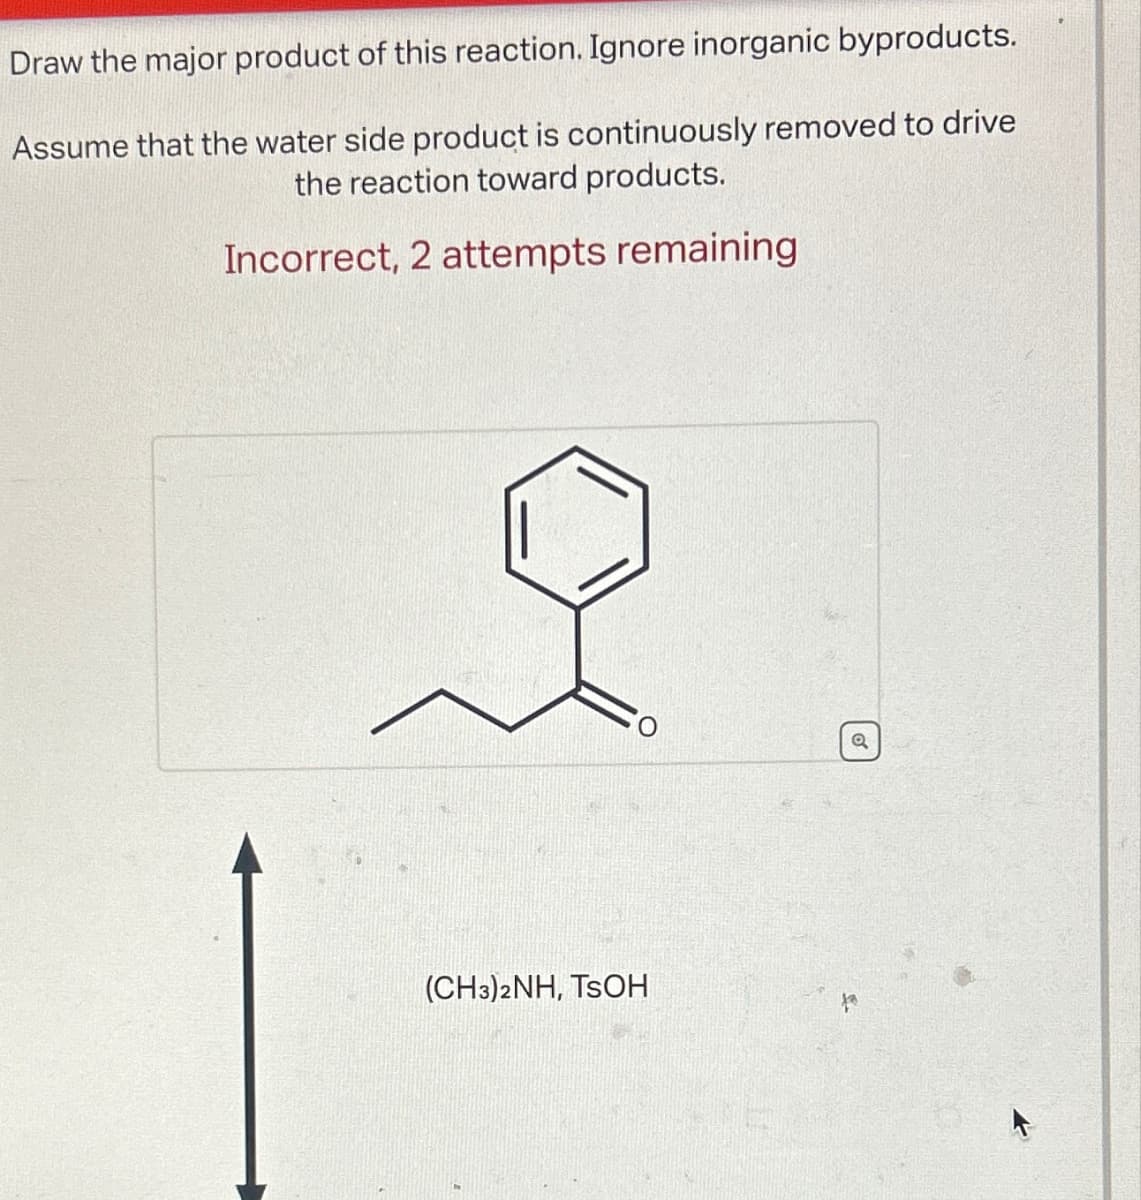 Draw the major product of this reaction. Ignore inorganic byproducts.
Assume that the water side product is continuously removed to drive
the reaction toward products.
Incorrect, 2 attempts remaining
(CH3)2NH, TSOH
a